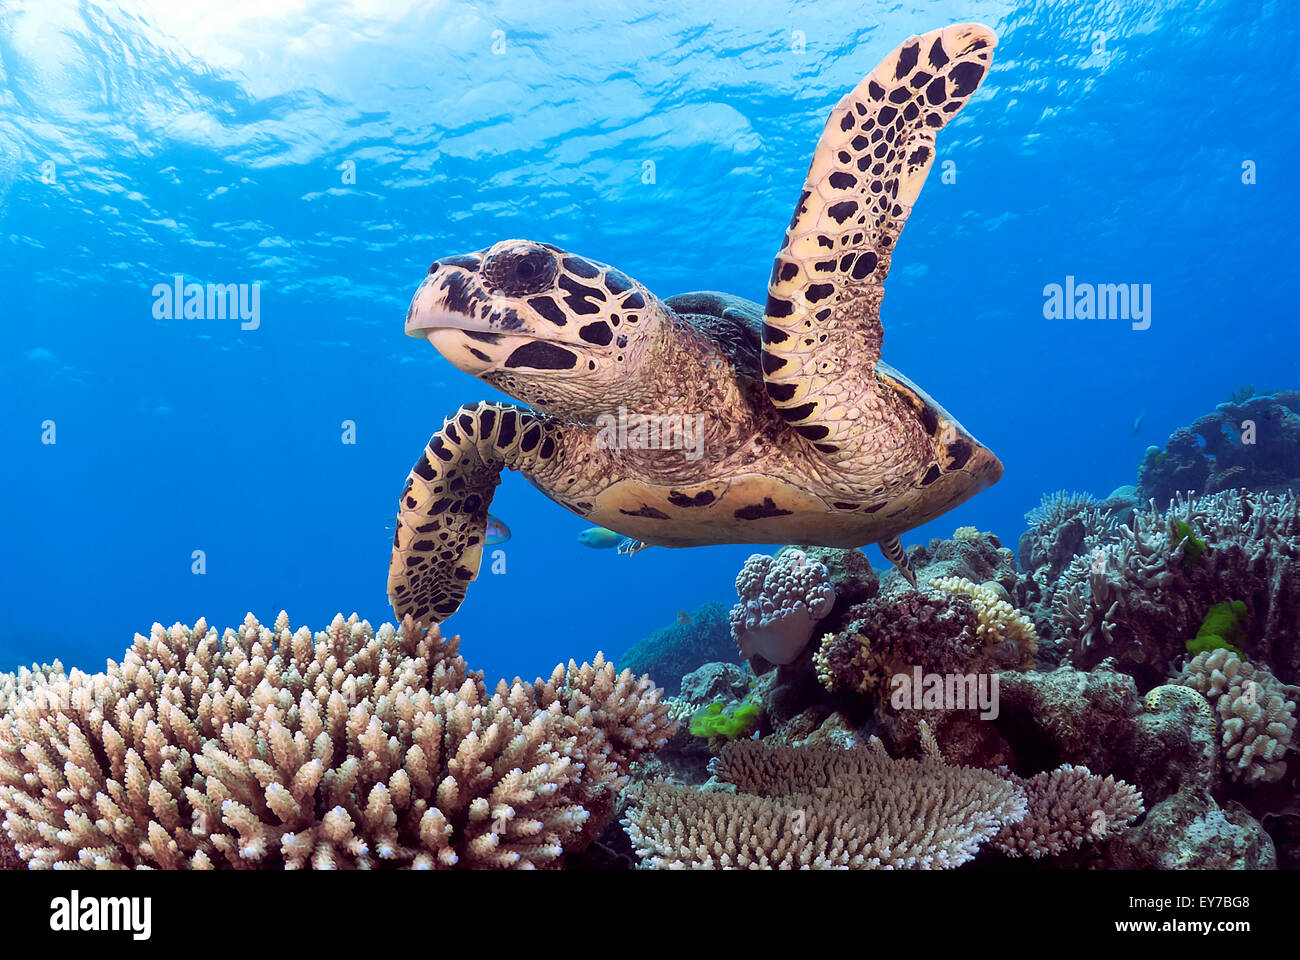 Hawksbill Sea Turtle (Eretmochelys imbricata) swimming over a Coral Reef, Great Barrier Reef, Coral Sea, Queensland, Australia Stock Photo